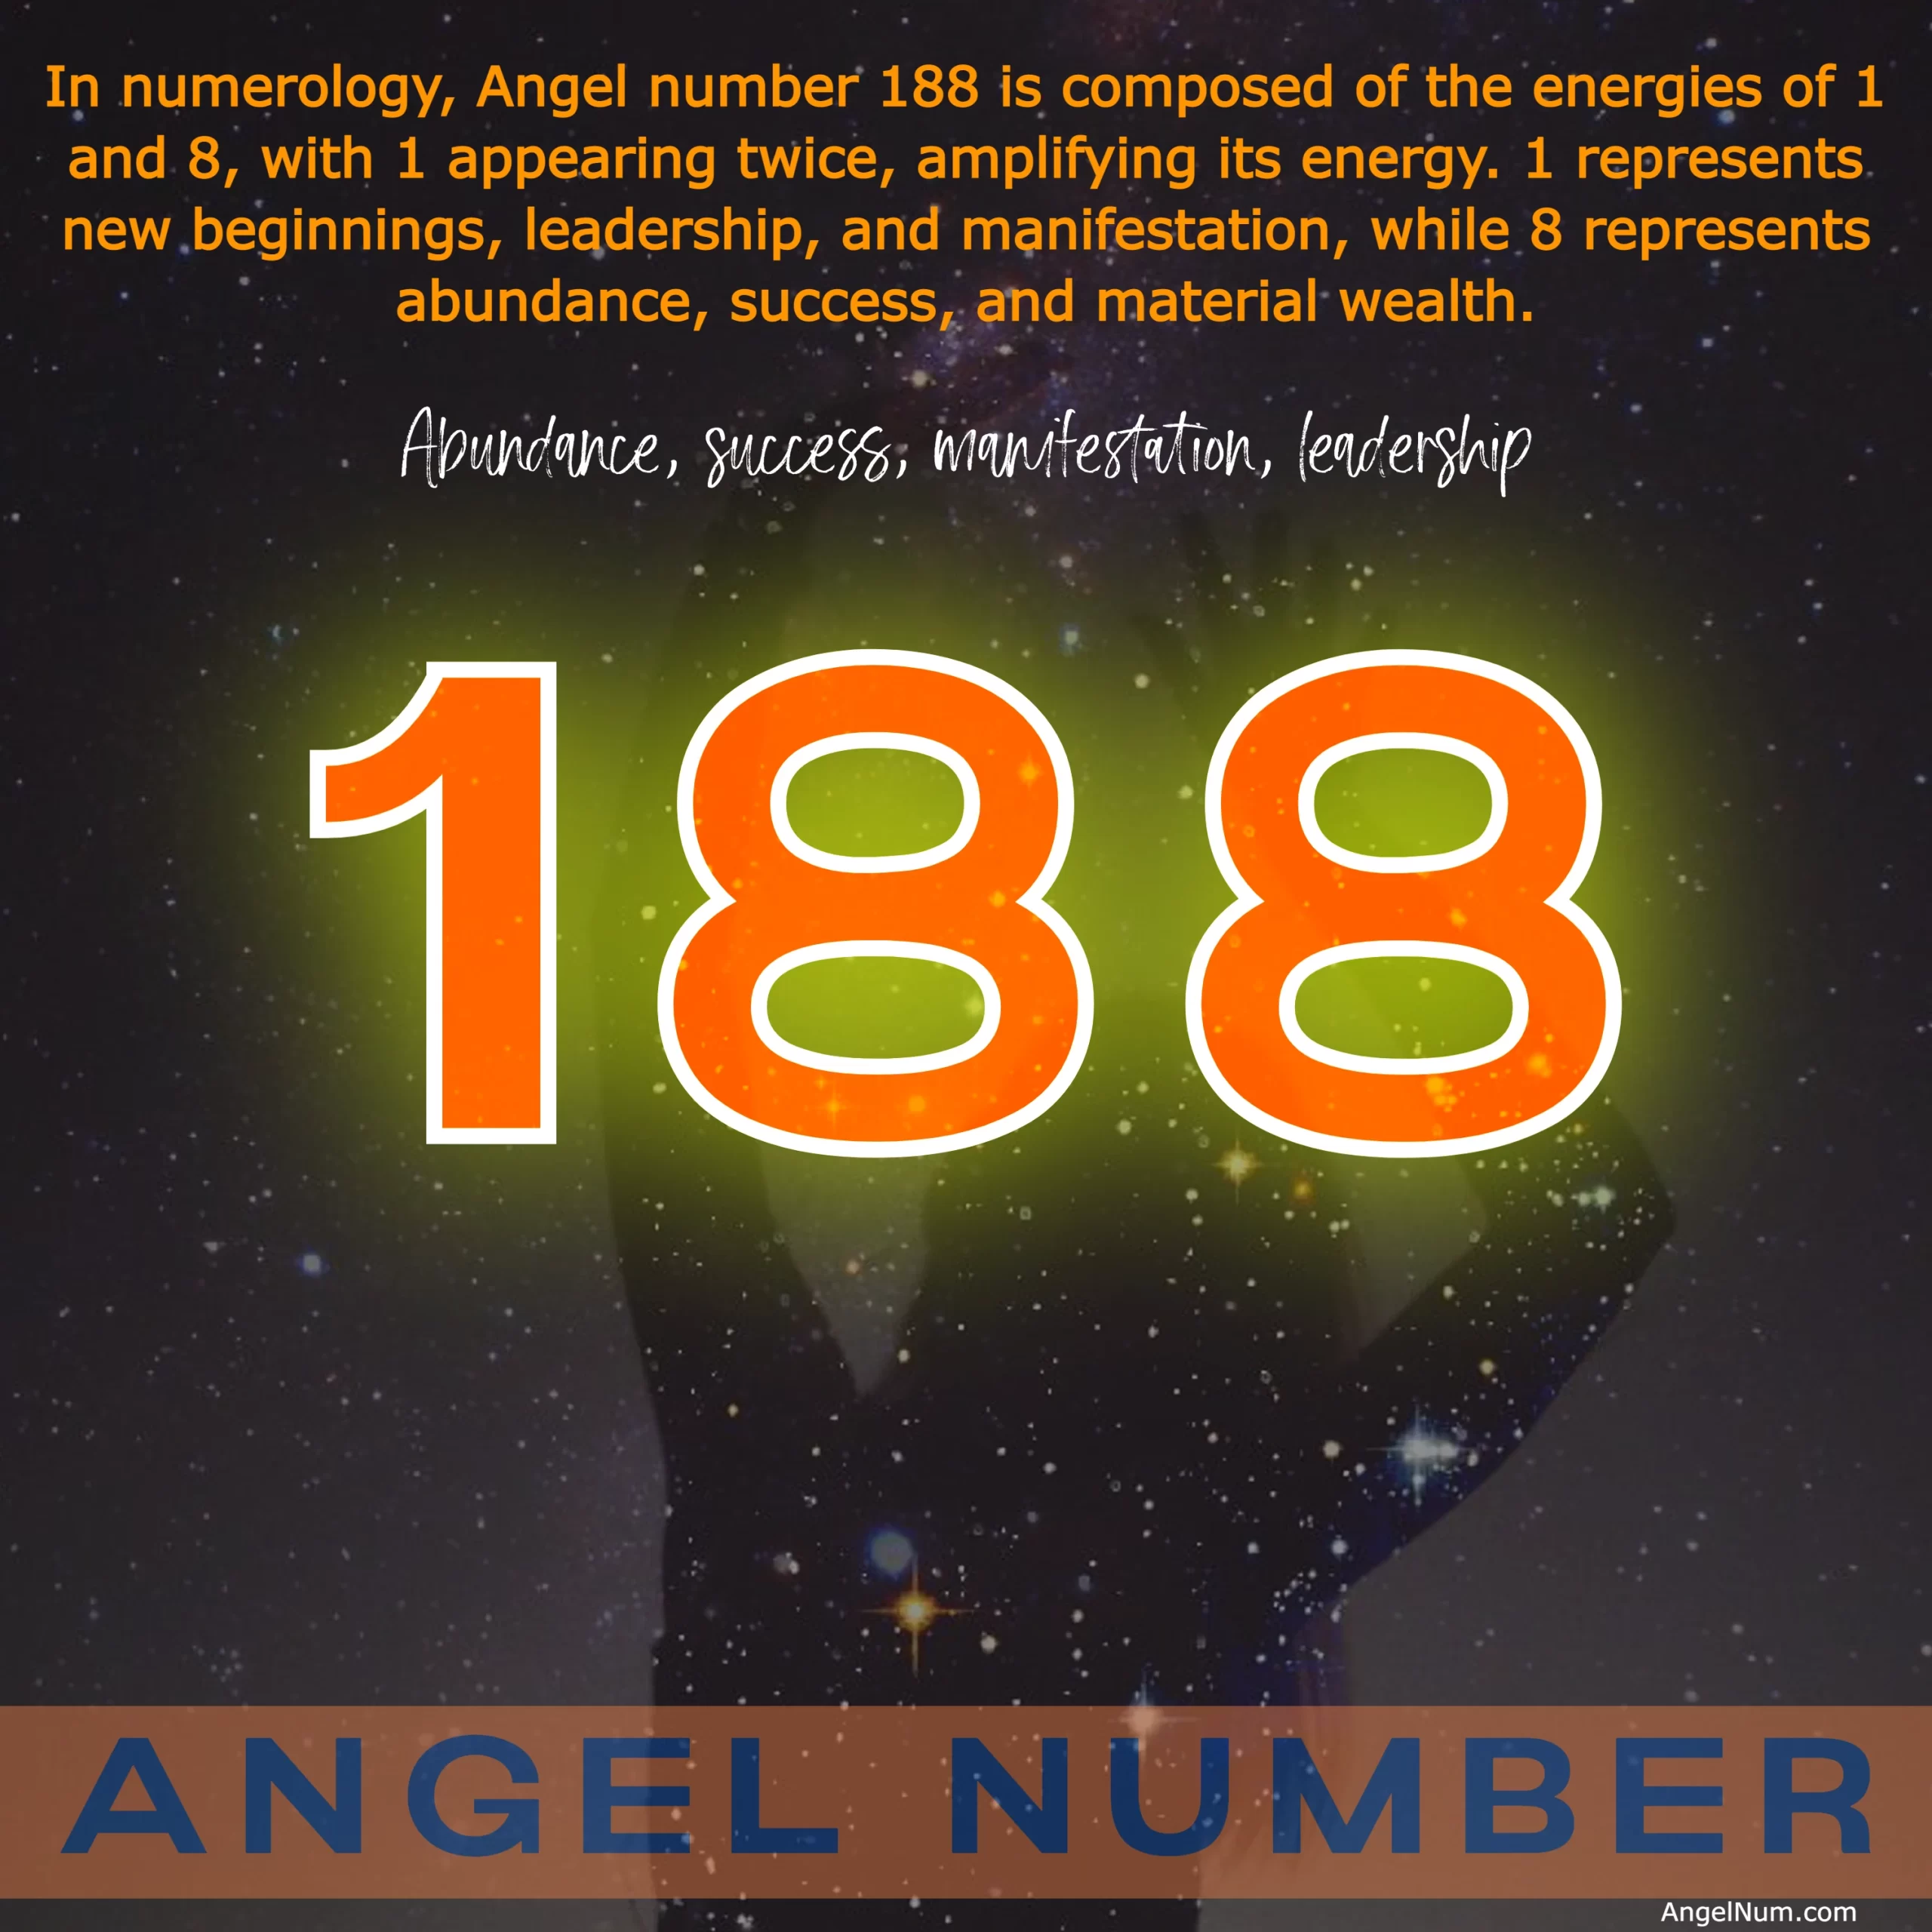 Angel Number 188: Discover Its Meaning and Symbolism